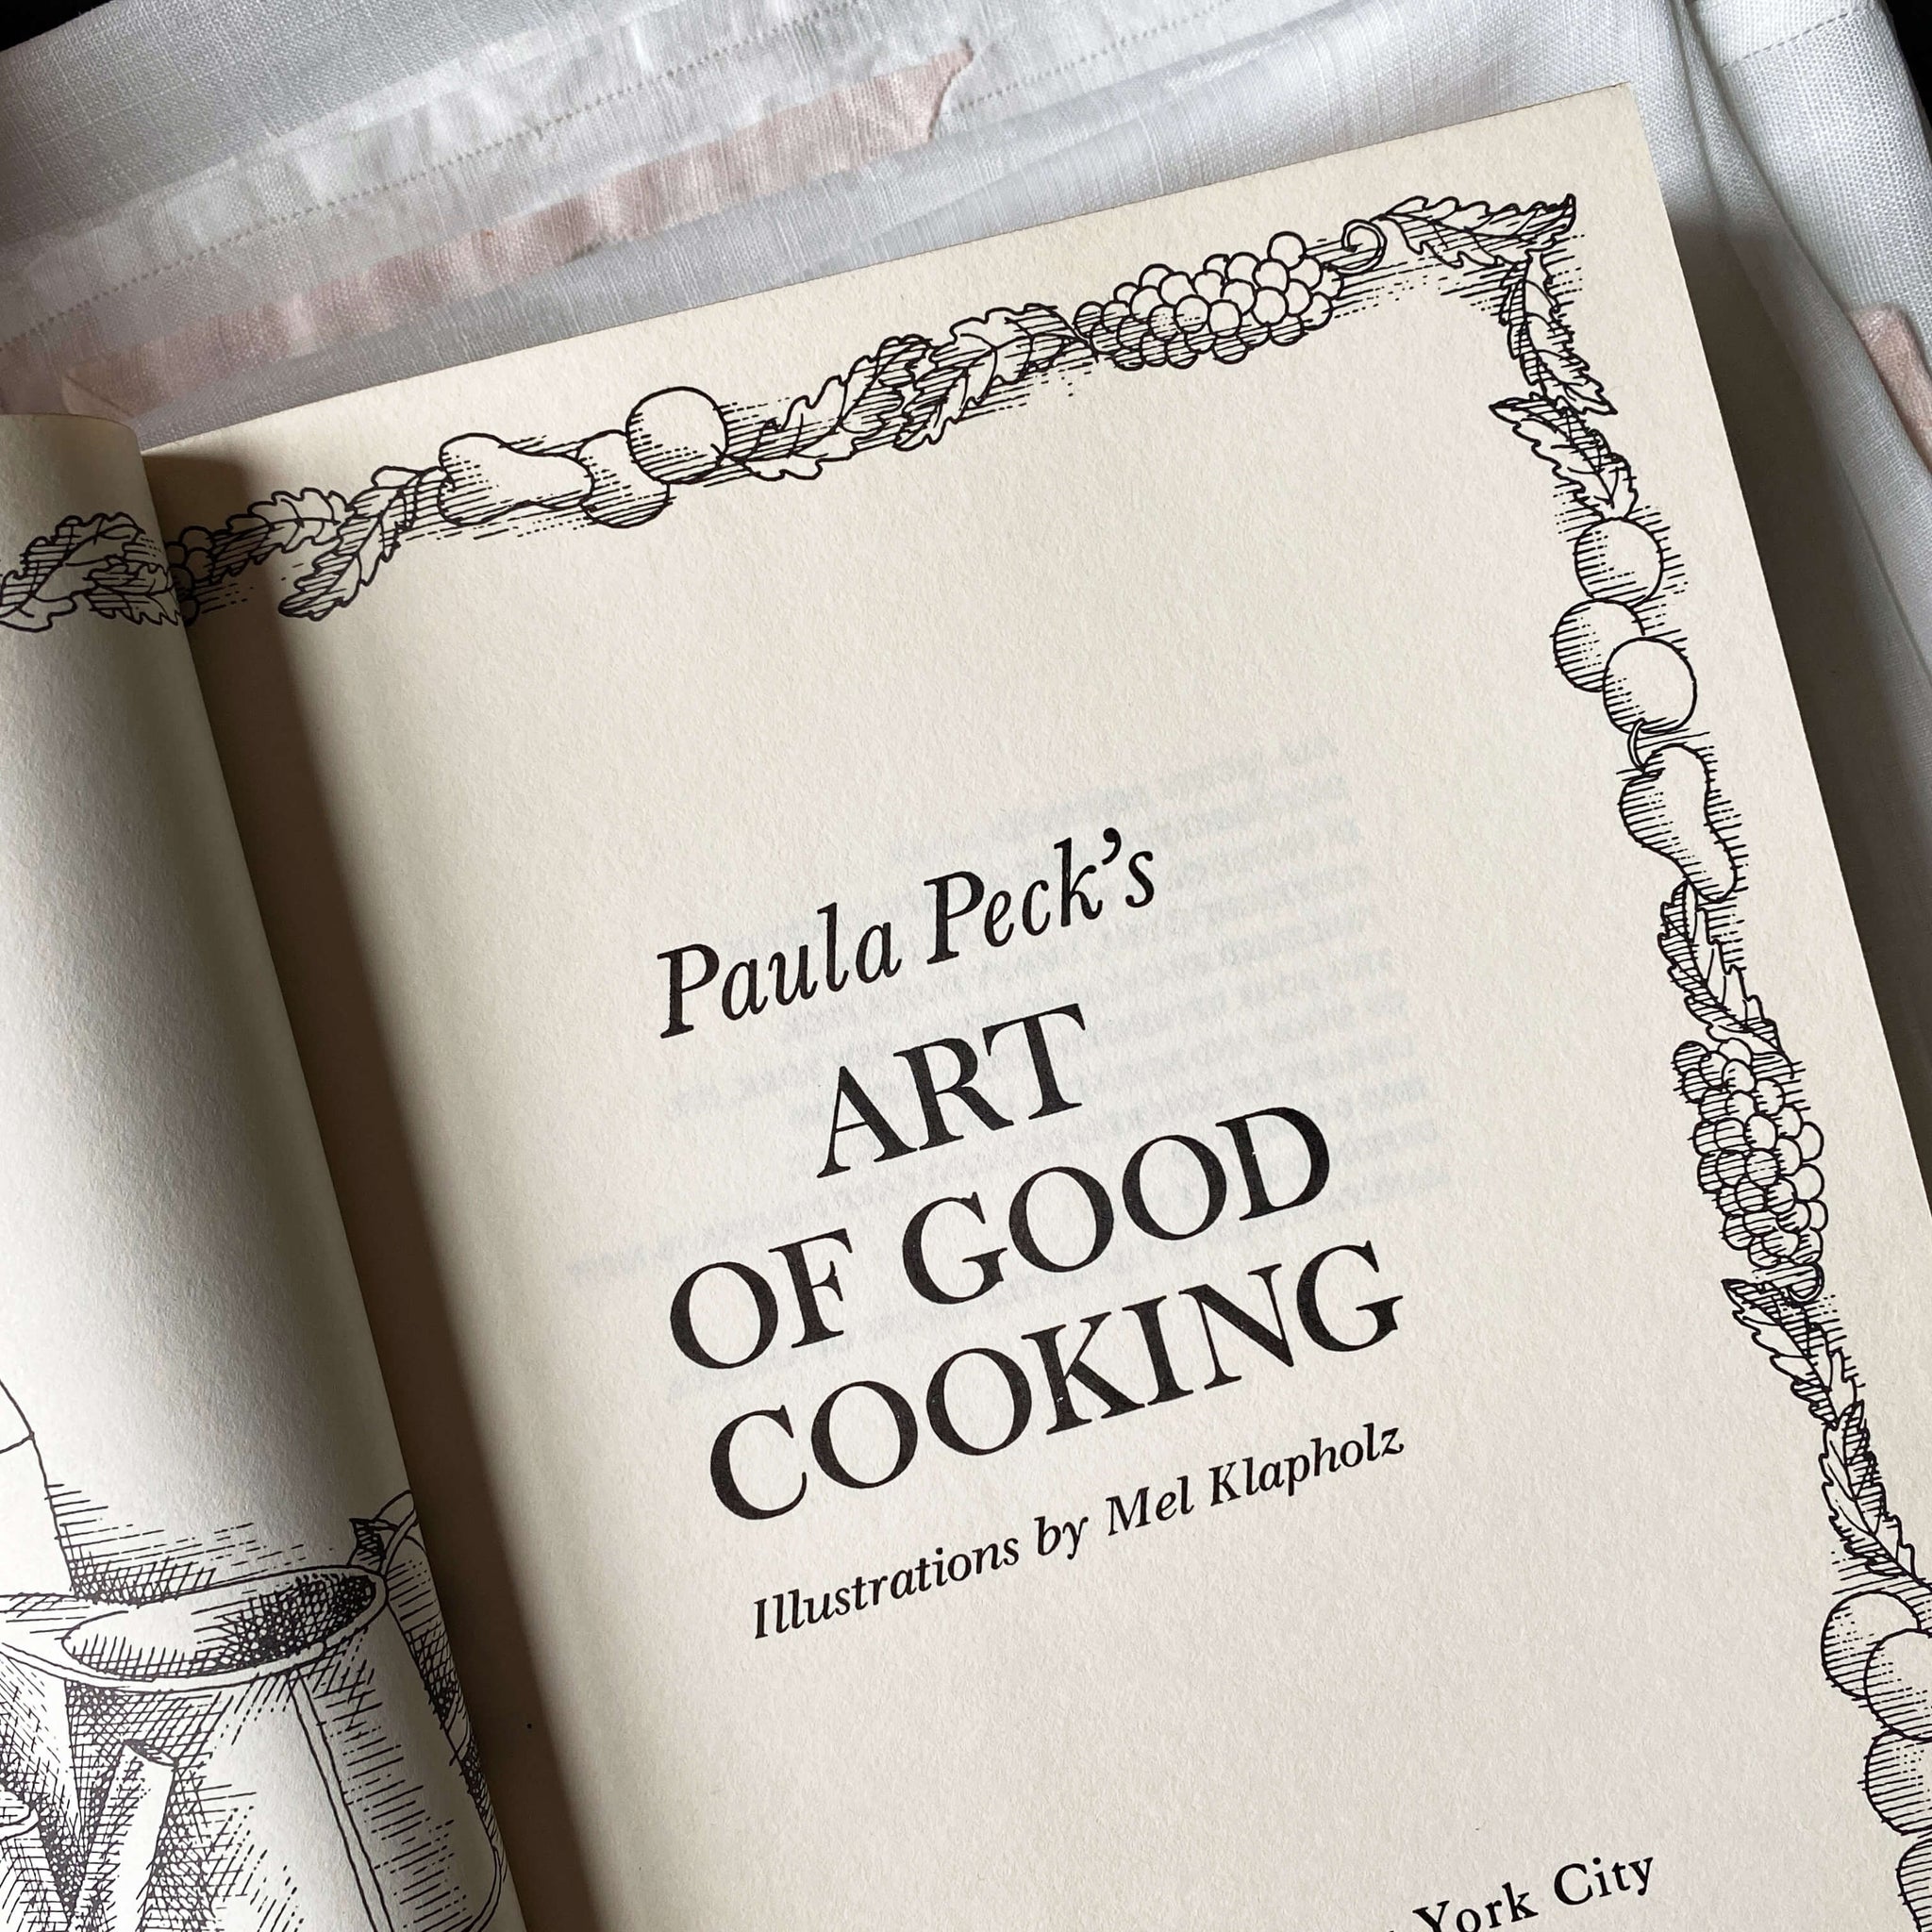 The Art of Good Cooking by Paula Peck - 1966 Edition